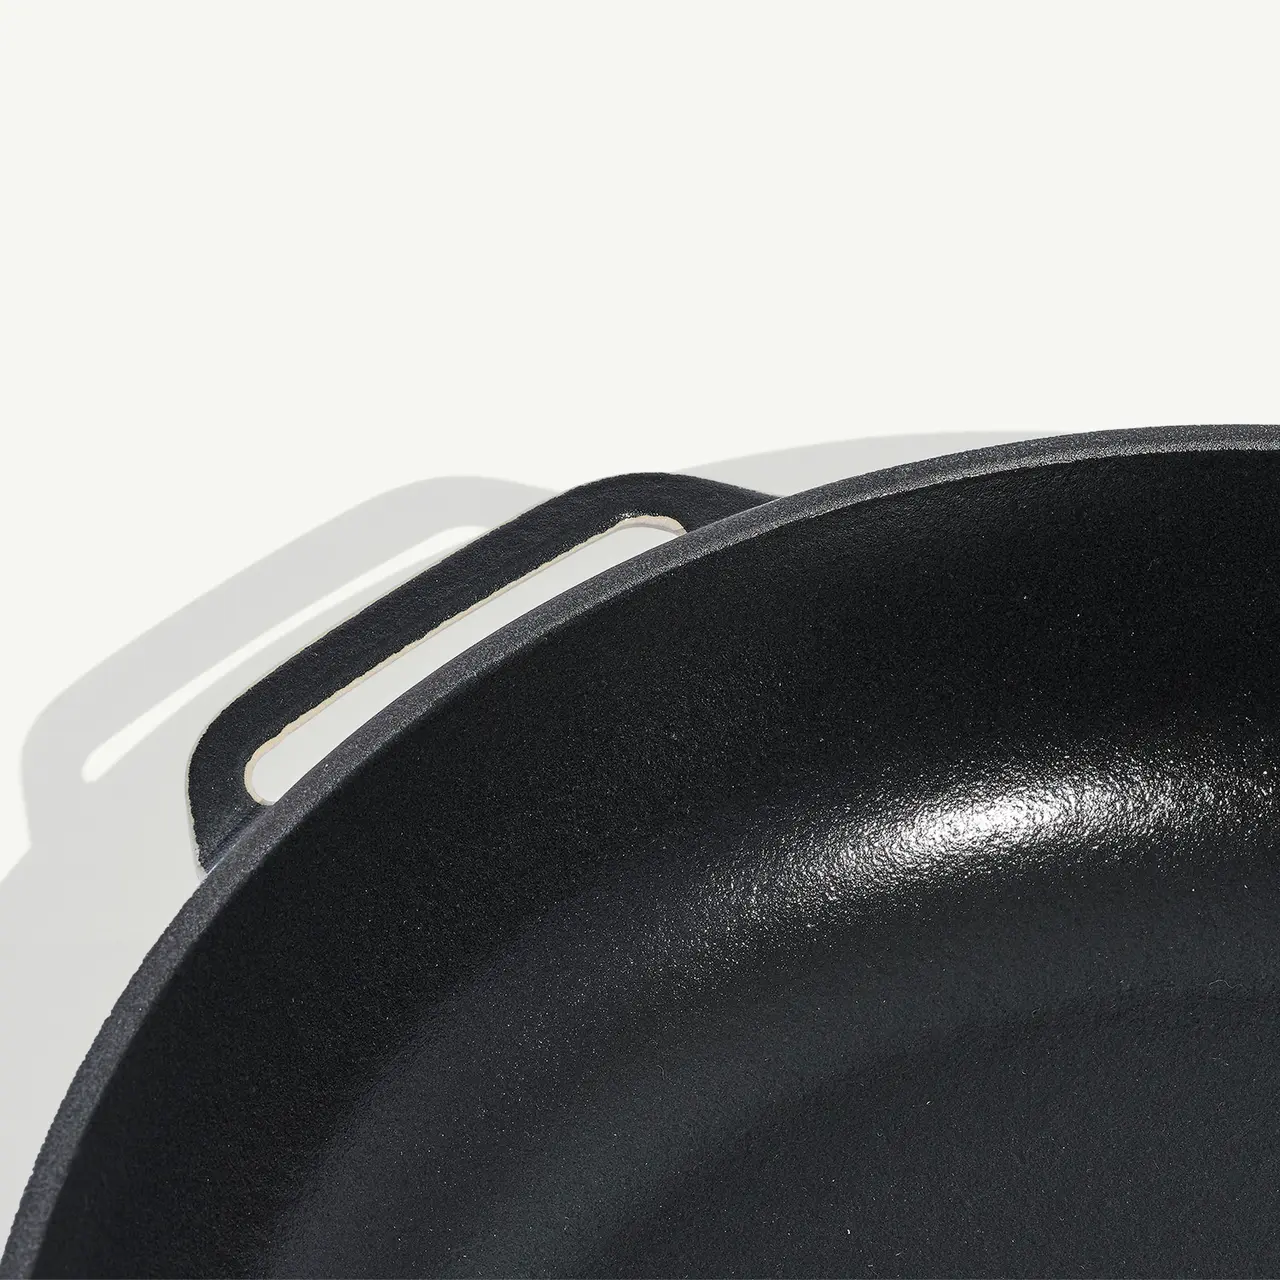 A close-up view of a black cast iron skillet on a white background, showcasing its handle and interior surface.